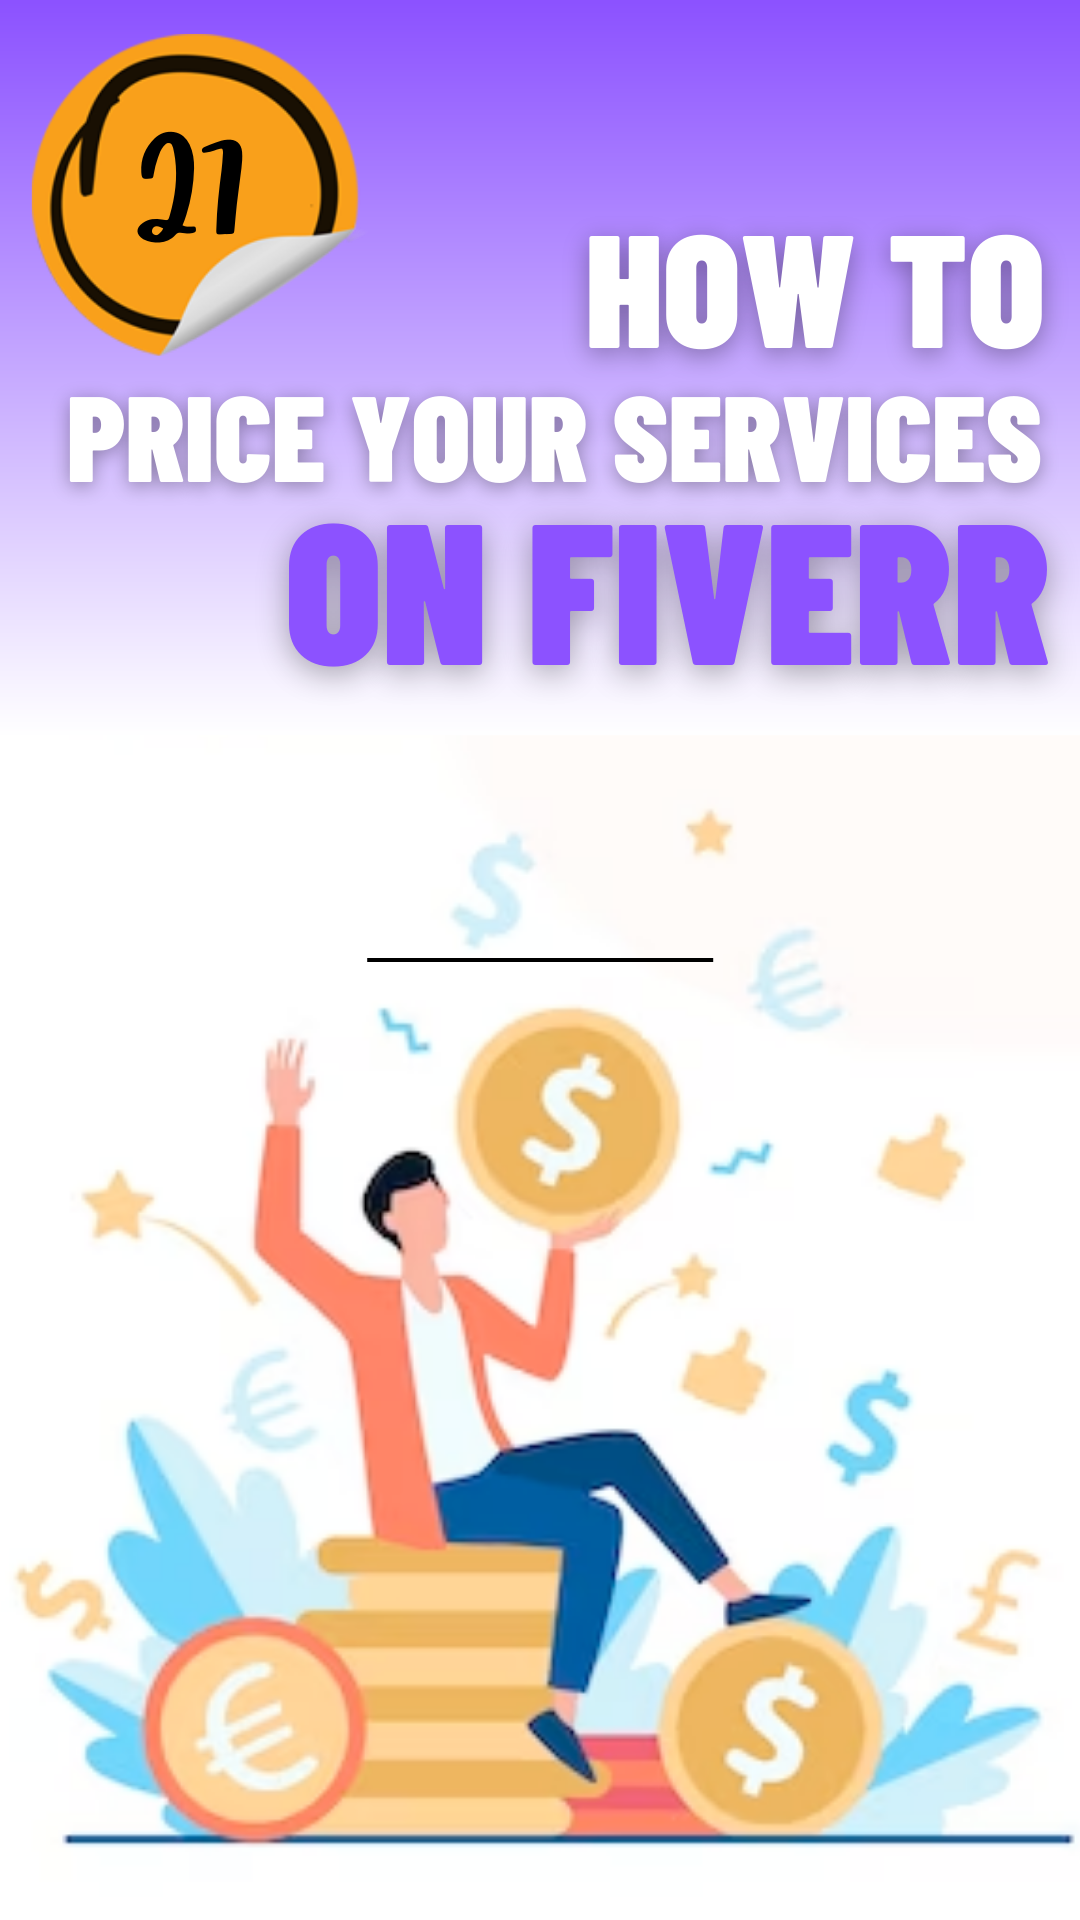 How to price your services on Fiverr